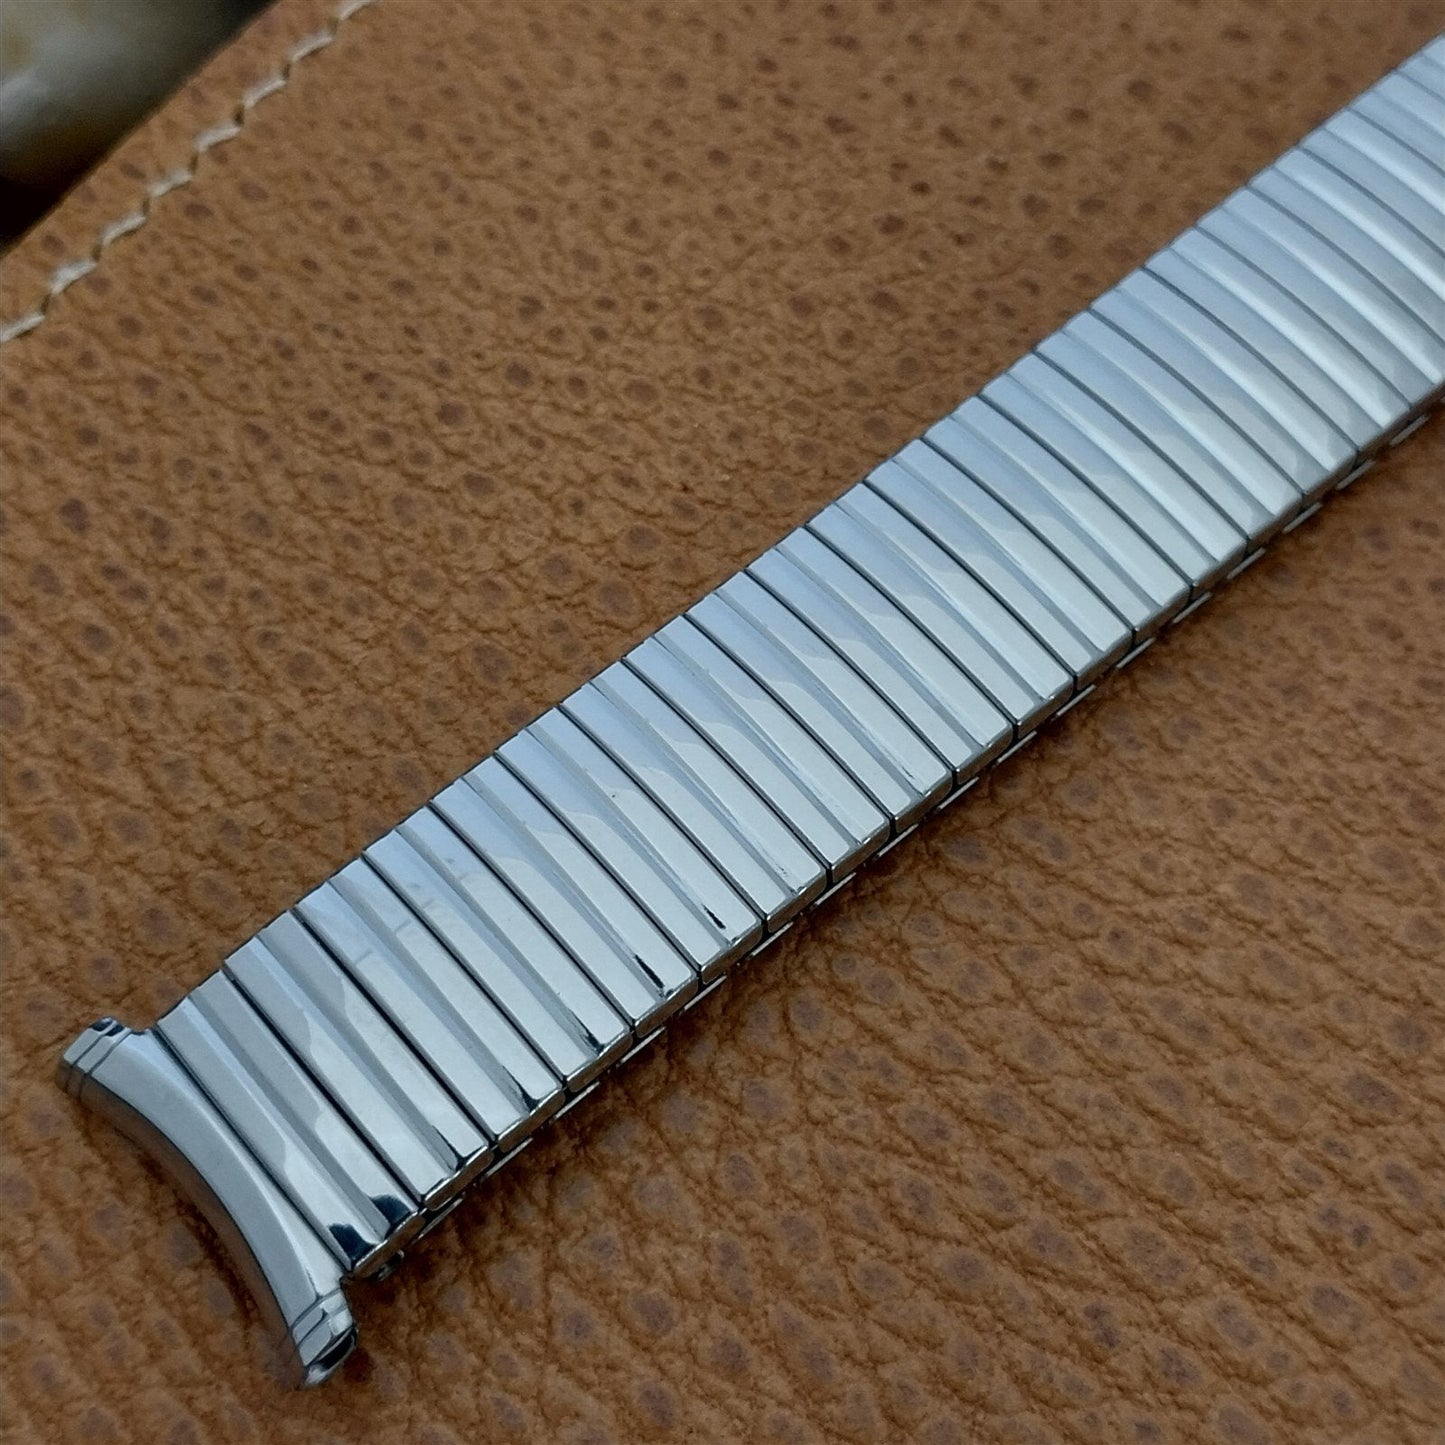 USA Made Stainless Steel 1969 Speidel Linesman 19mm nos Vintage Watch Band